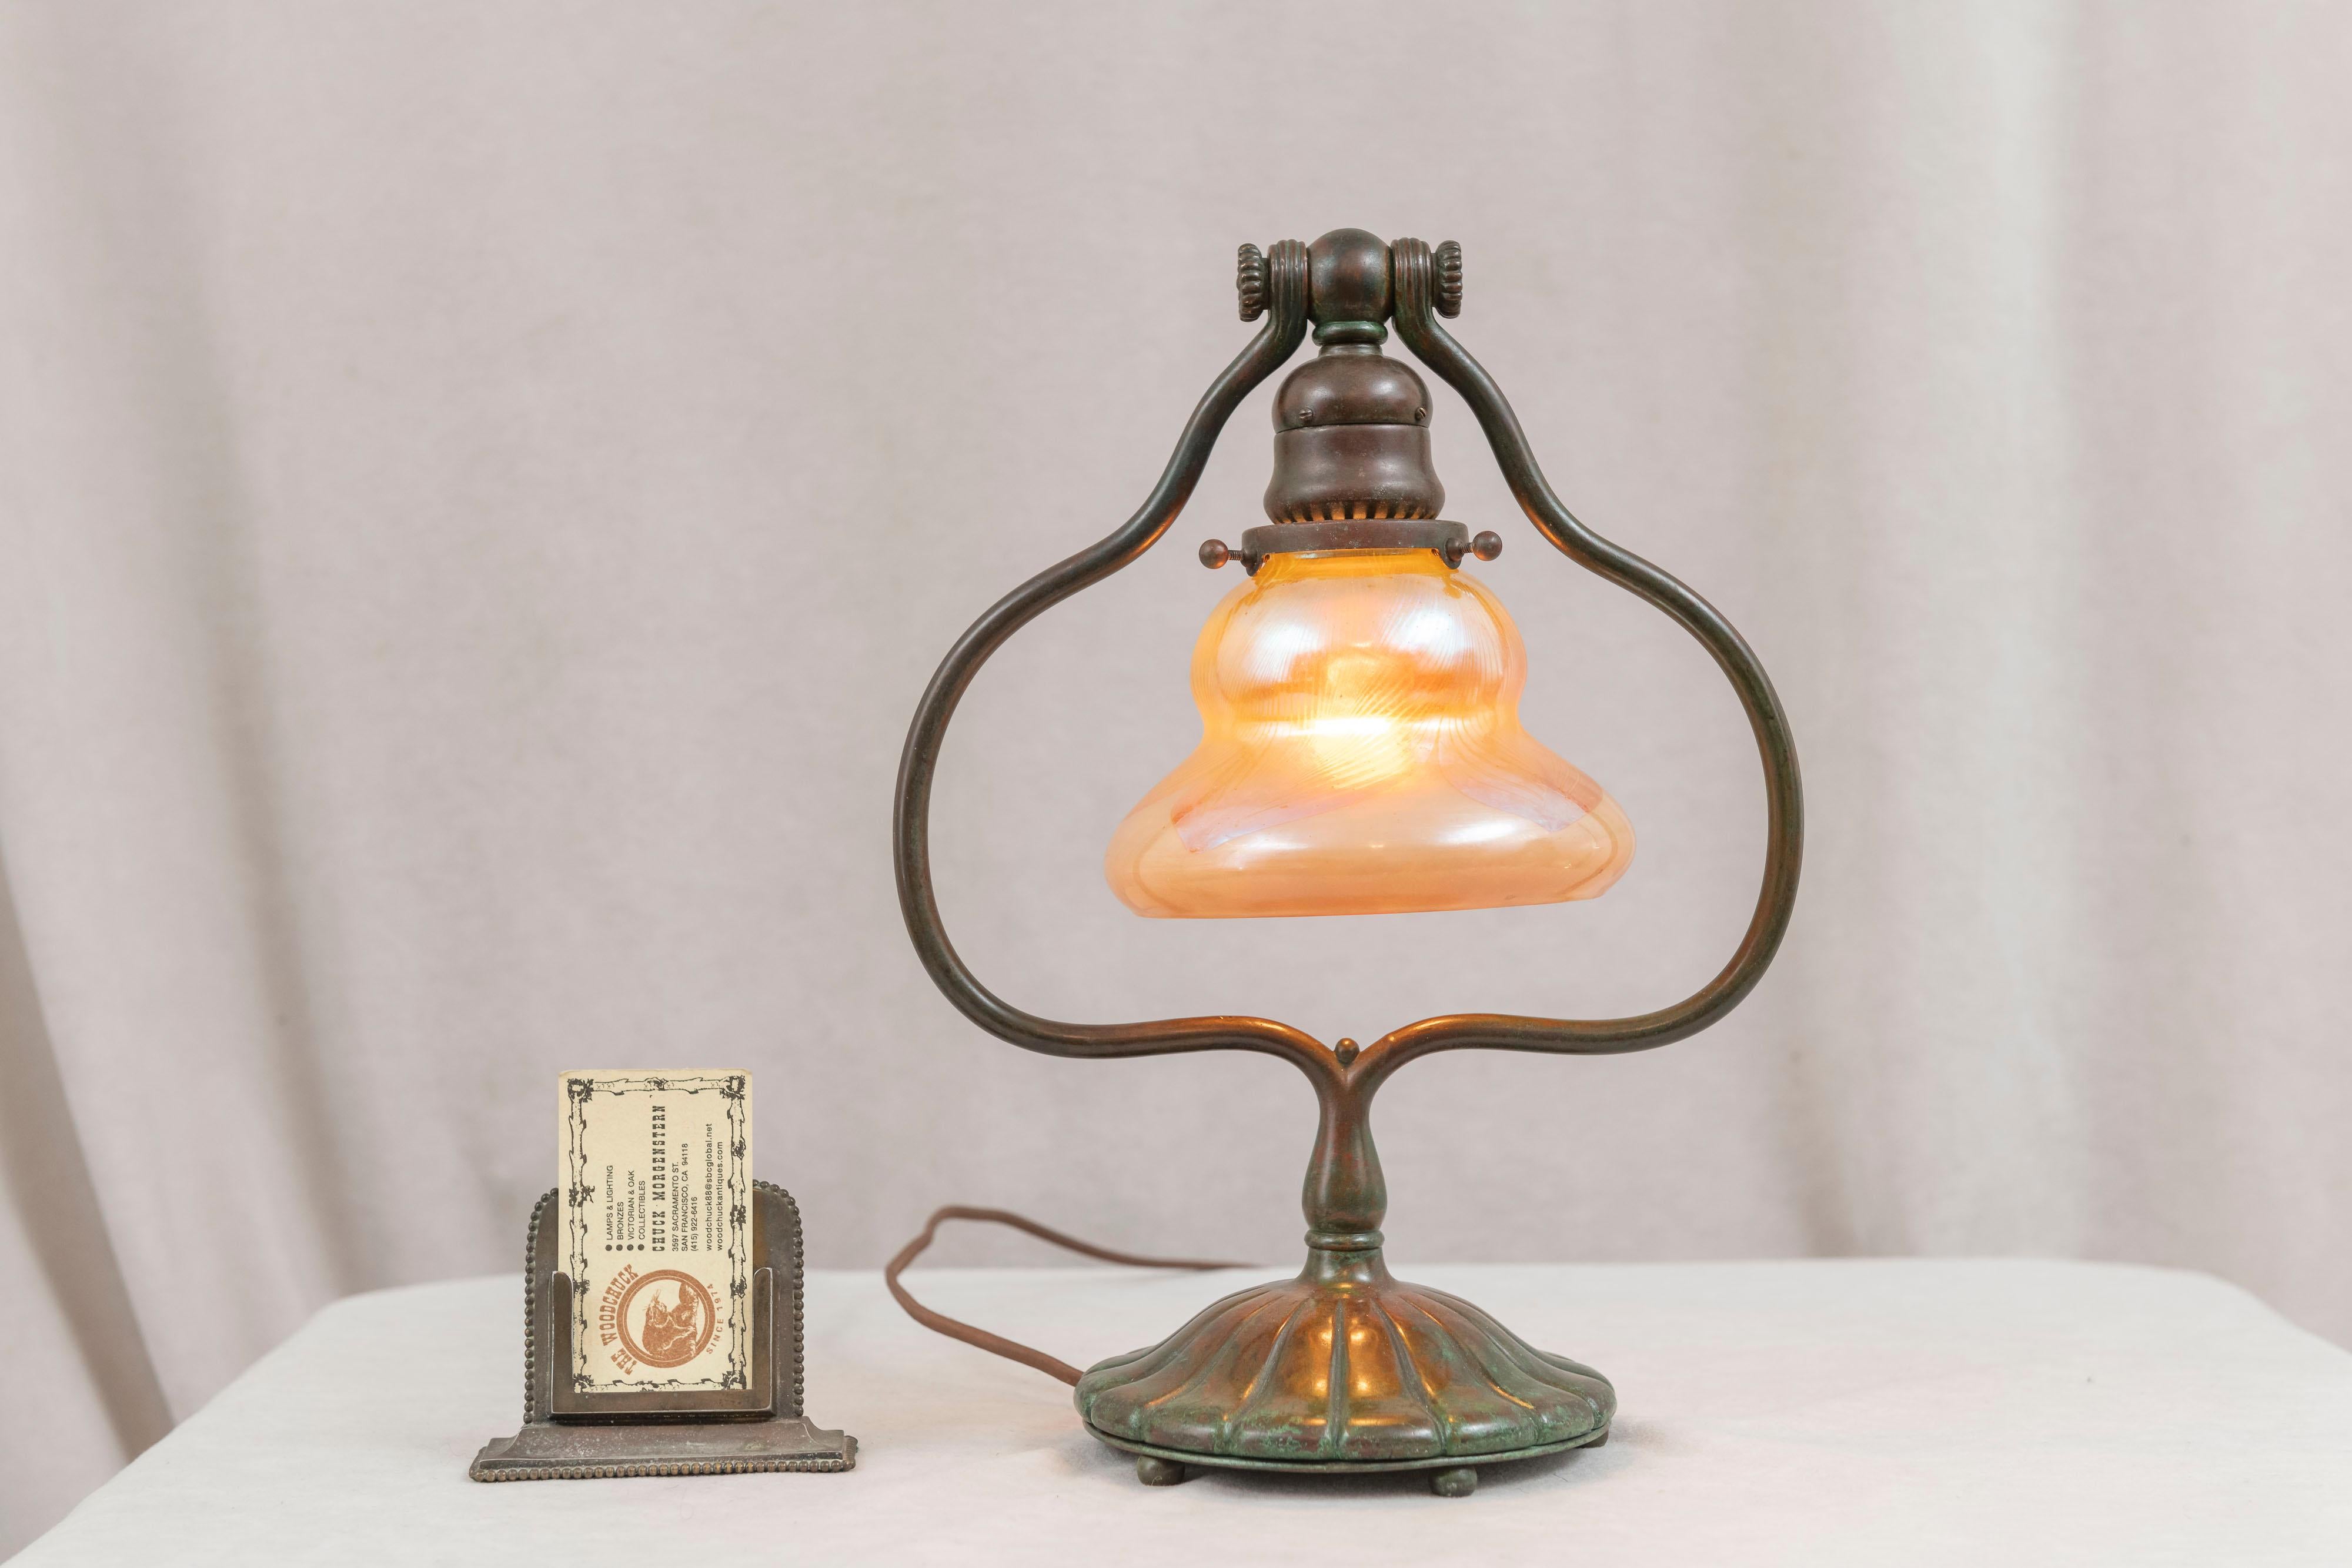 This is an authentic antique Tiffany & Co. Studios lamp. The bronze base which supports the shade can be adjusted to the angle of your preference. The shade is signed 